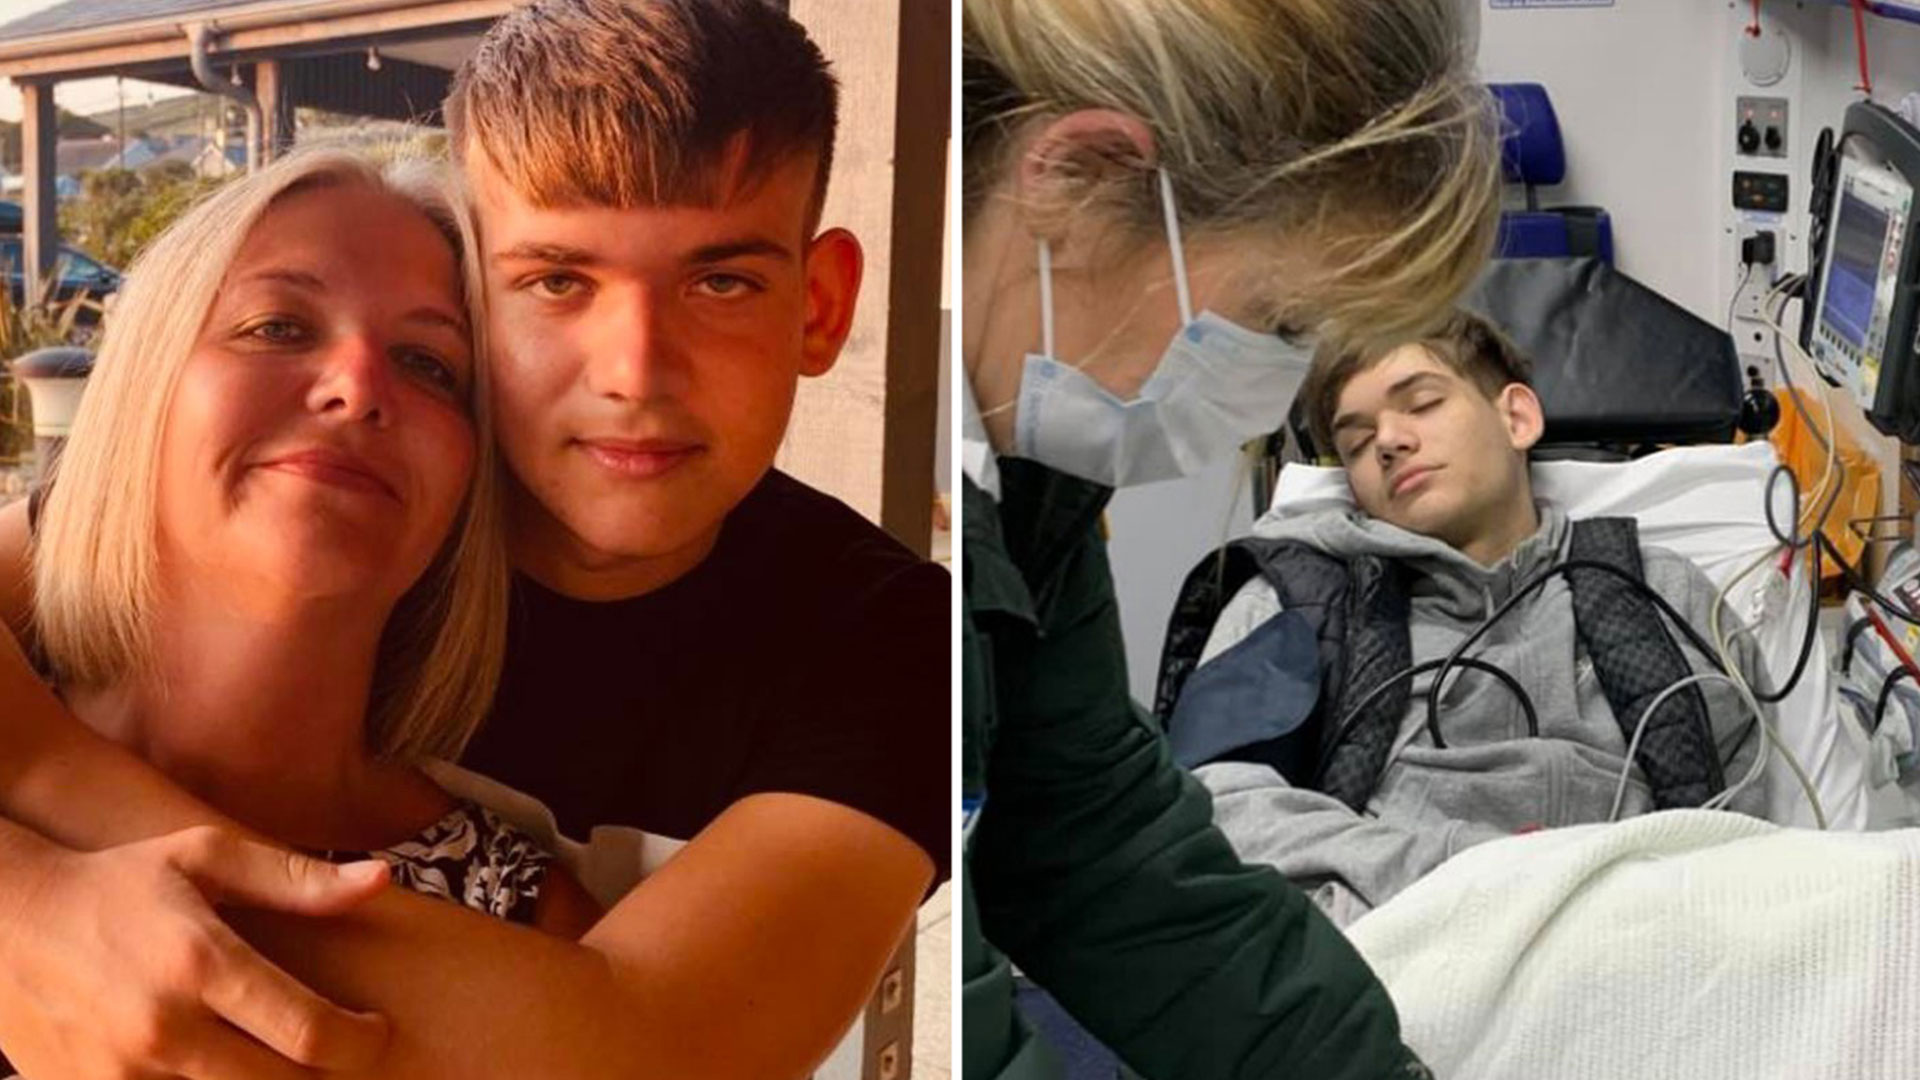 Mum's urgent warning after son collapsed after having 2 drags on an e-cigarette